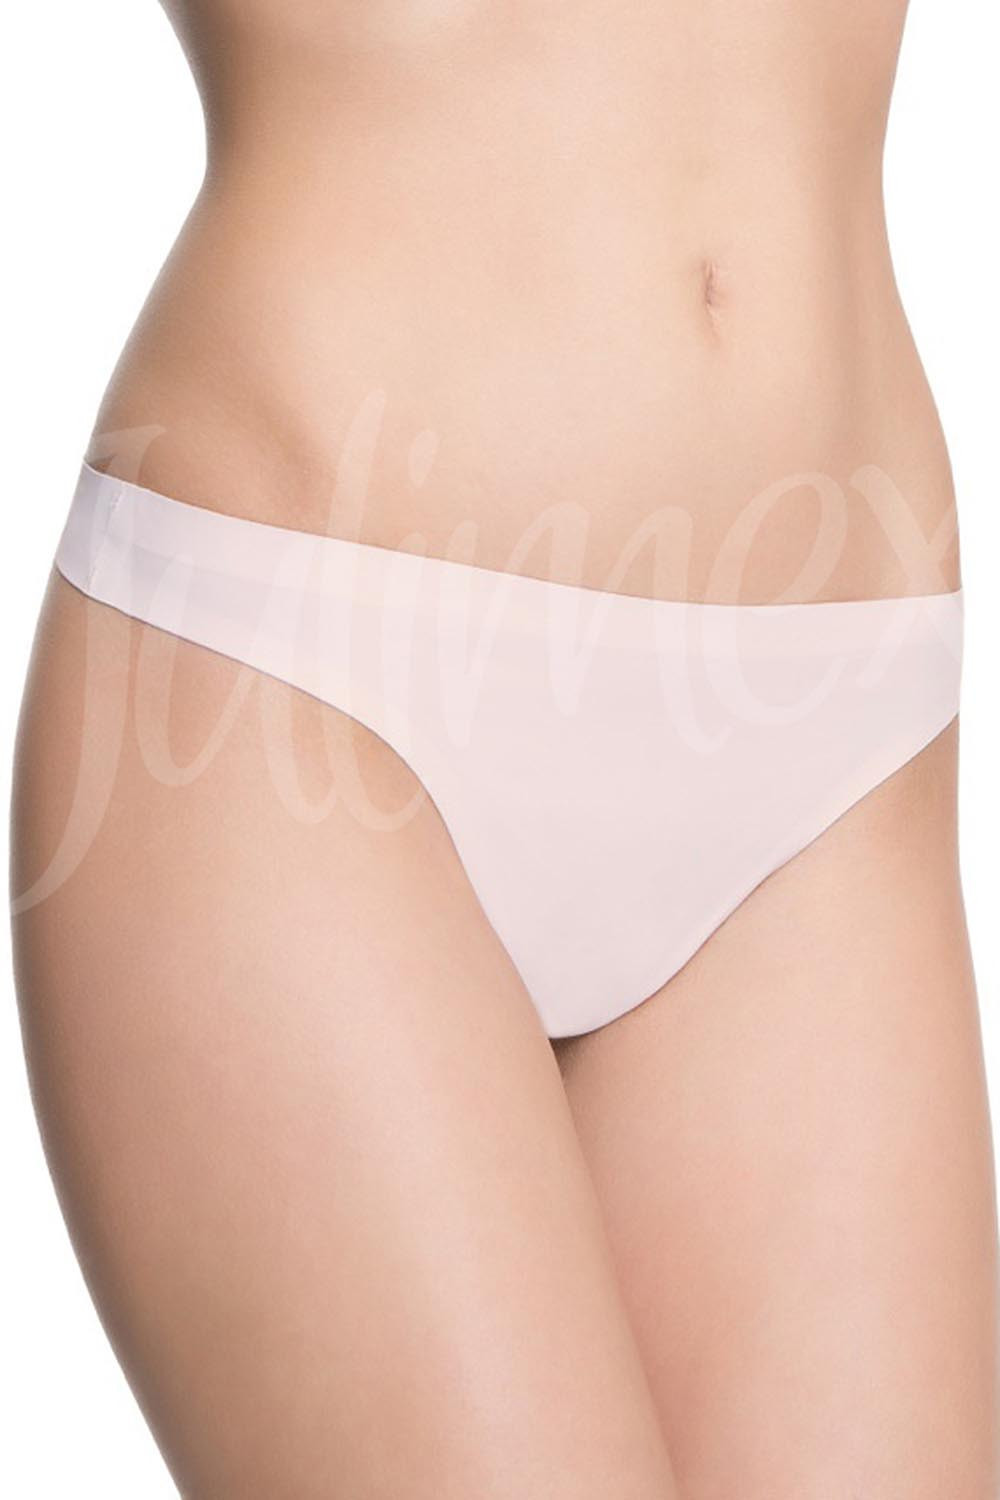 Julimex String panty kolor:beżowy S